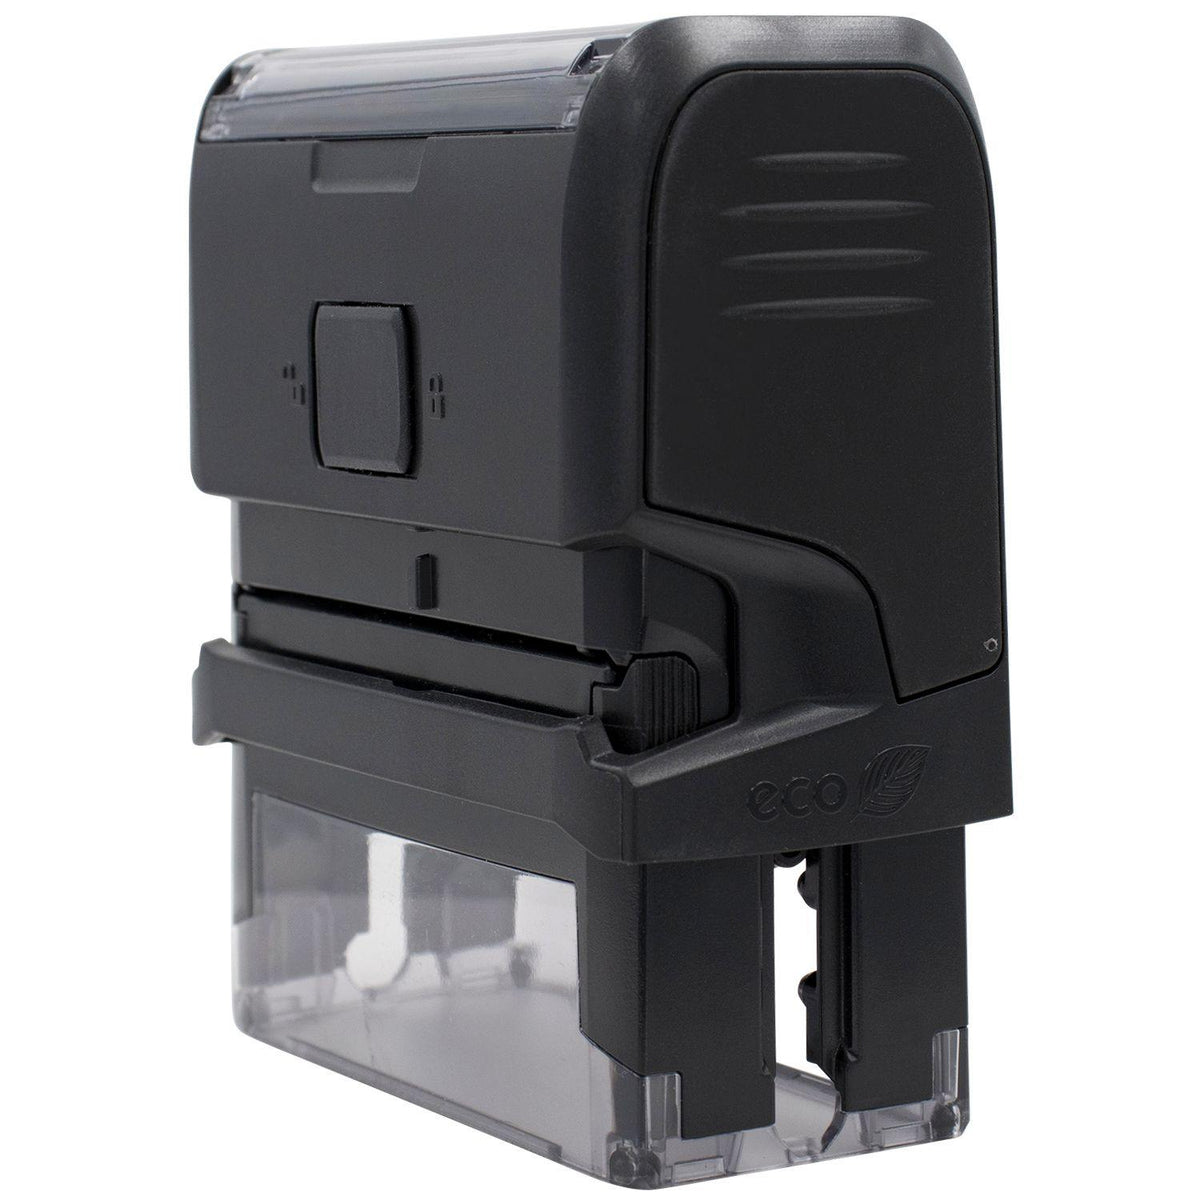 Self Inking Chrono Stamp - Engineer Seal Stamps - Brand_Trodat, Impression Size_Small, Stamp Type_Self-Inking Stamp, Type of Use_Medical Office